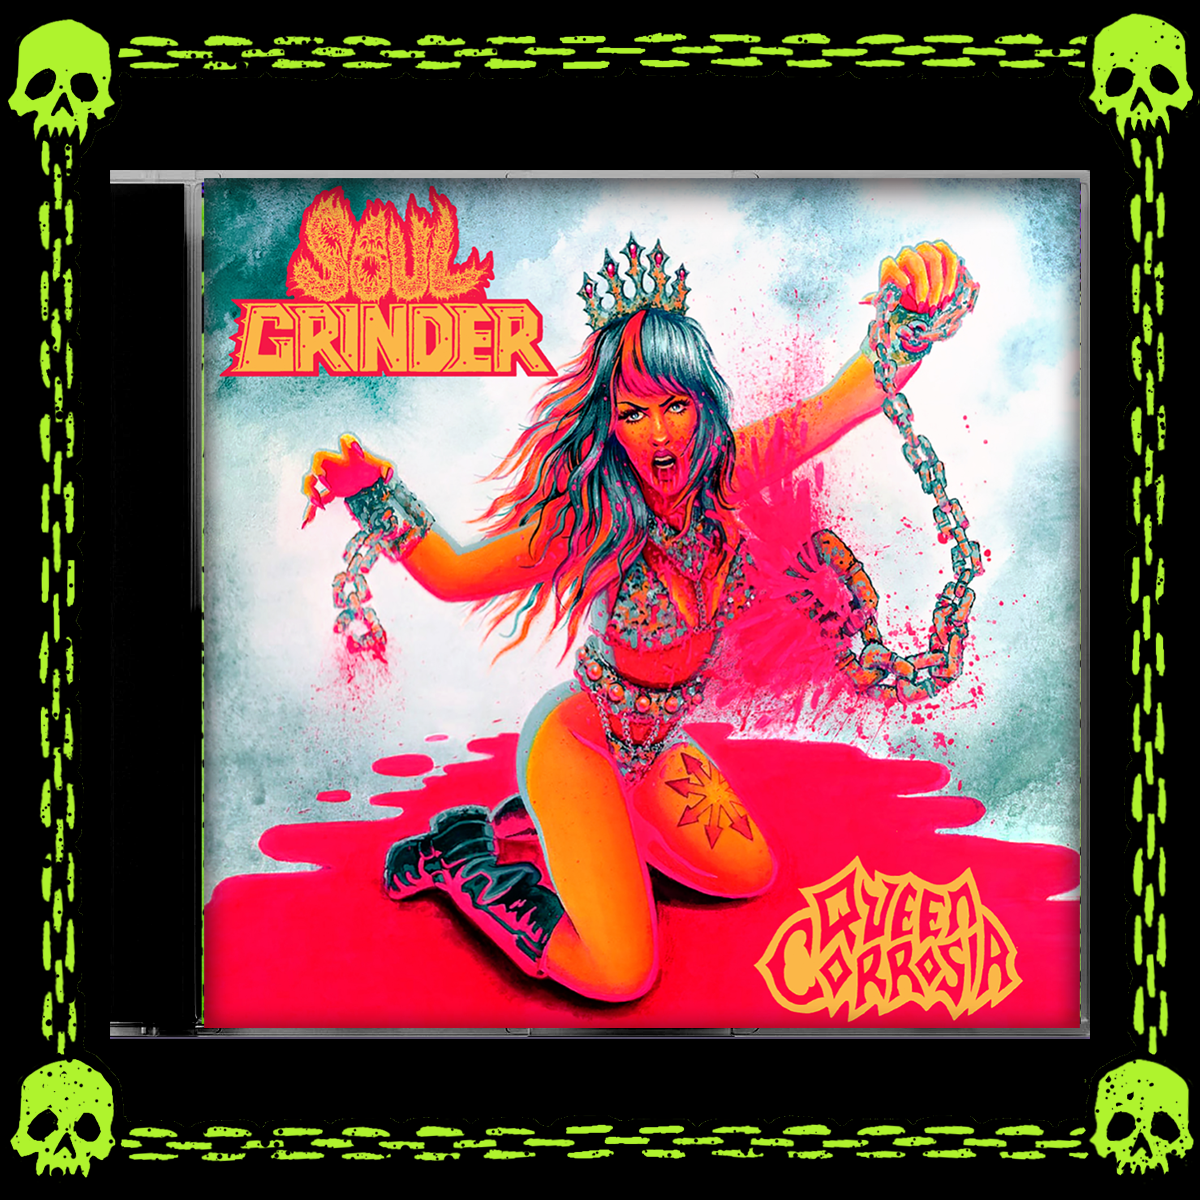 SOUL GRINDER QUEEN CORROSIA EP CD